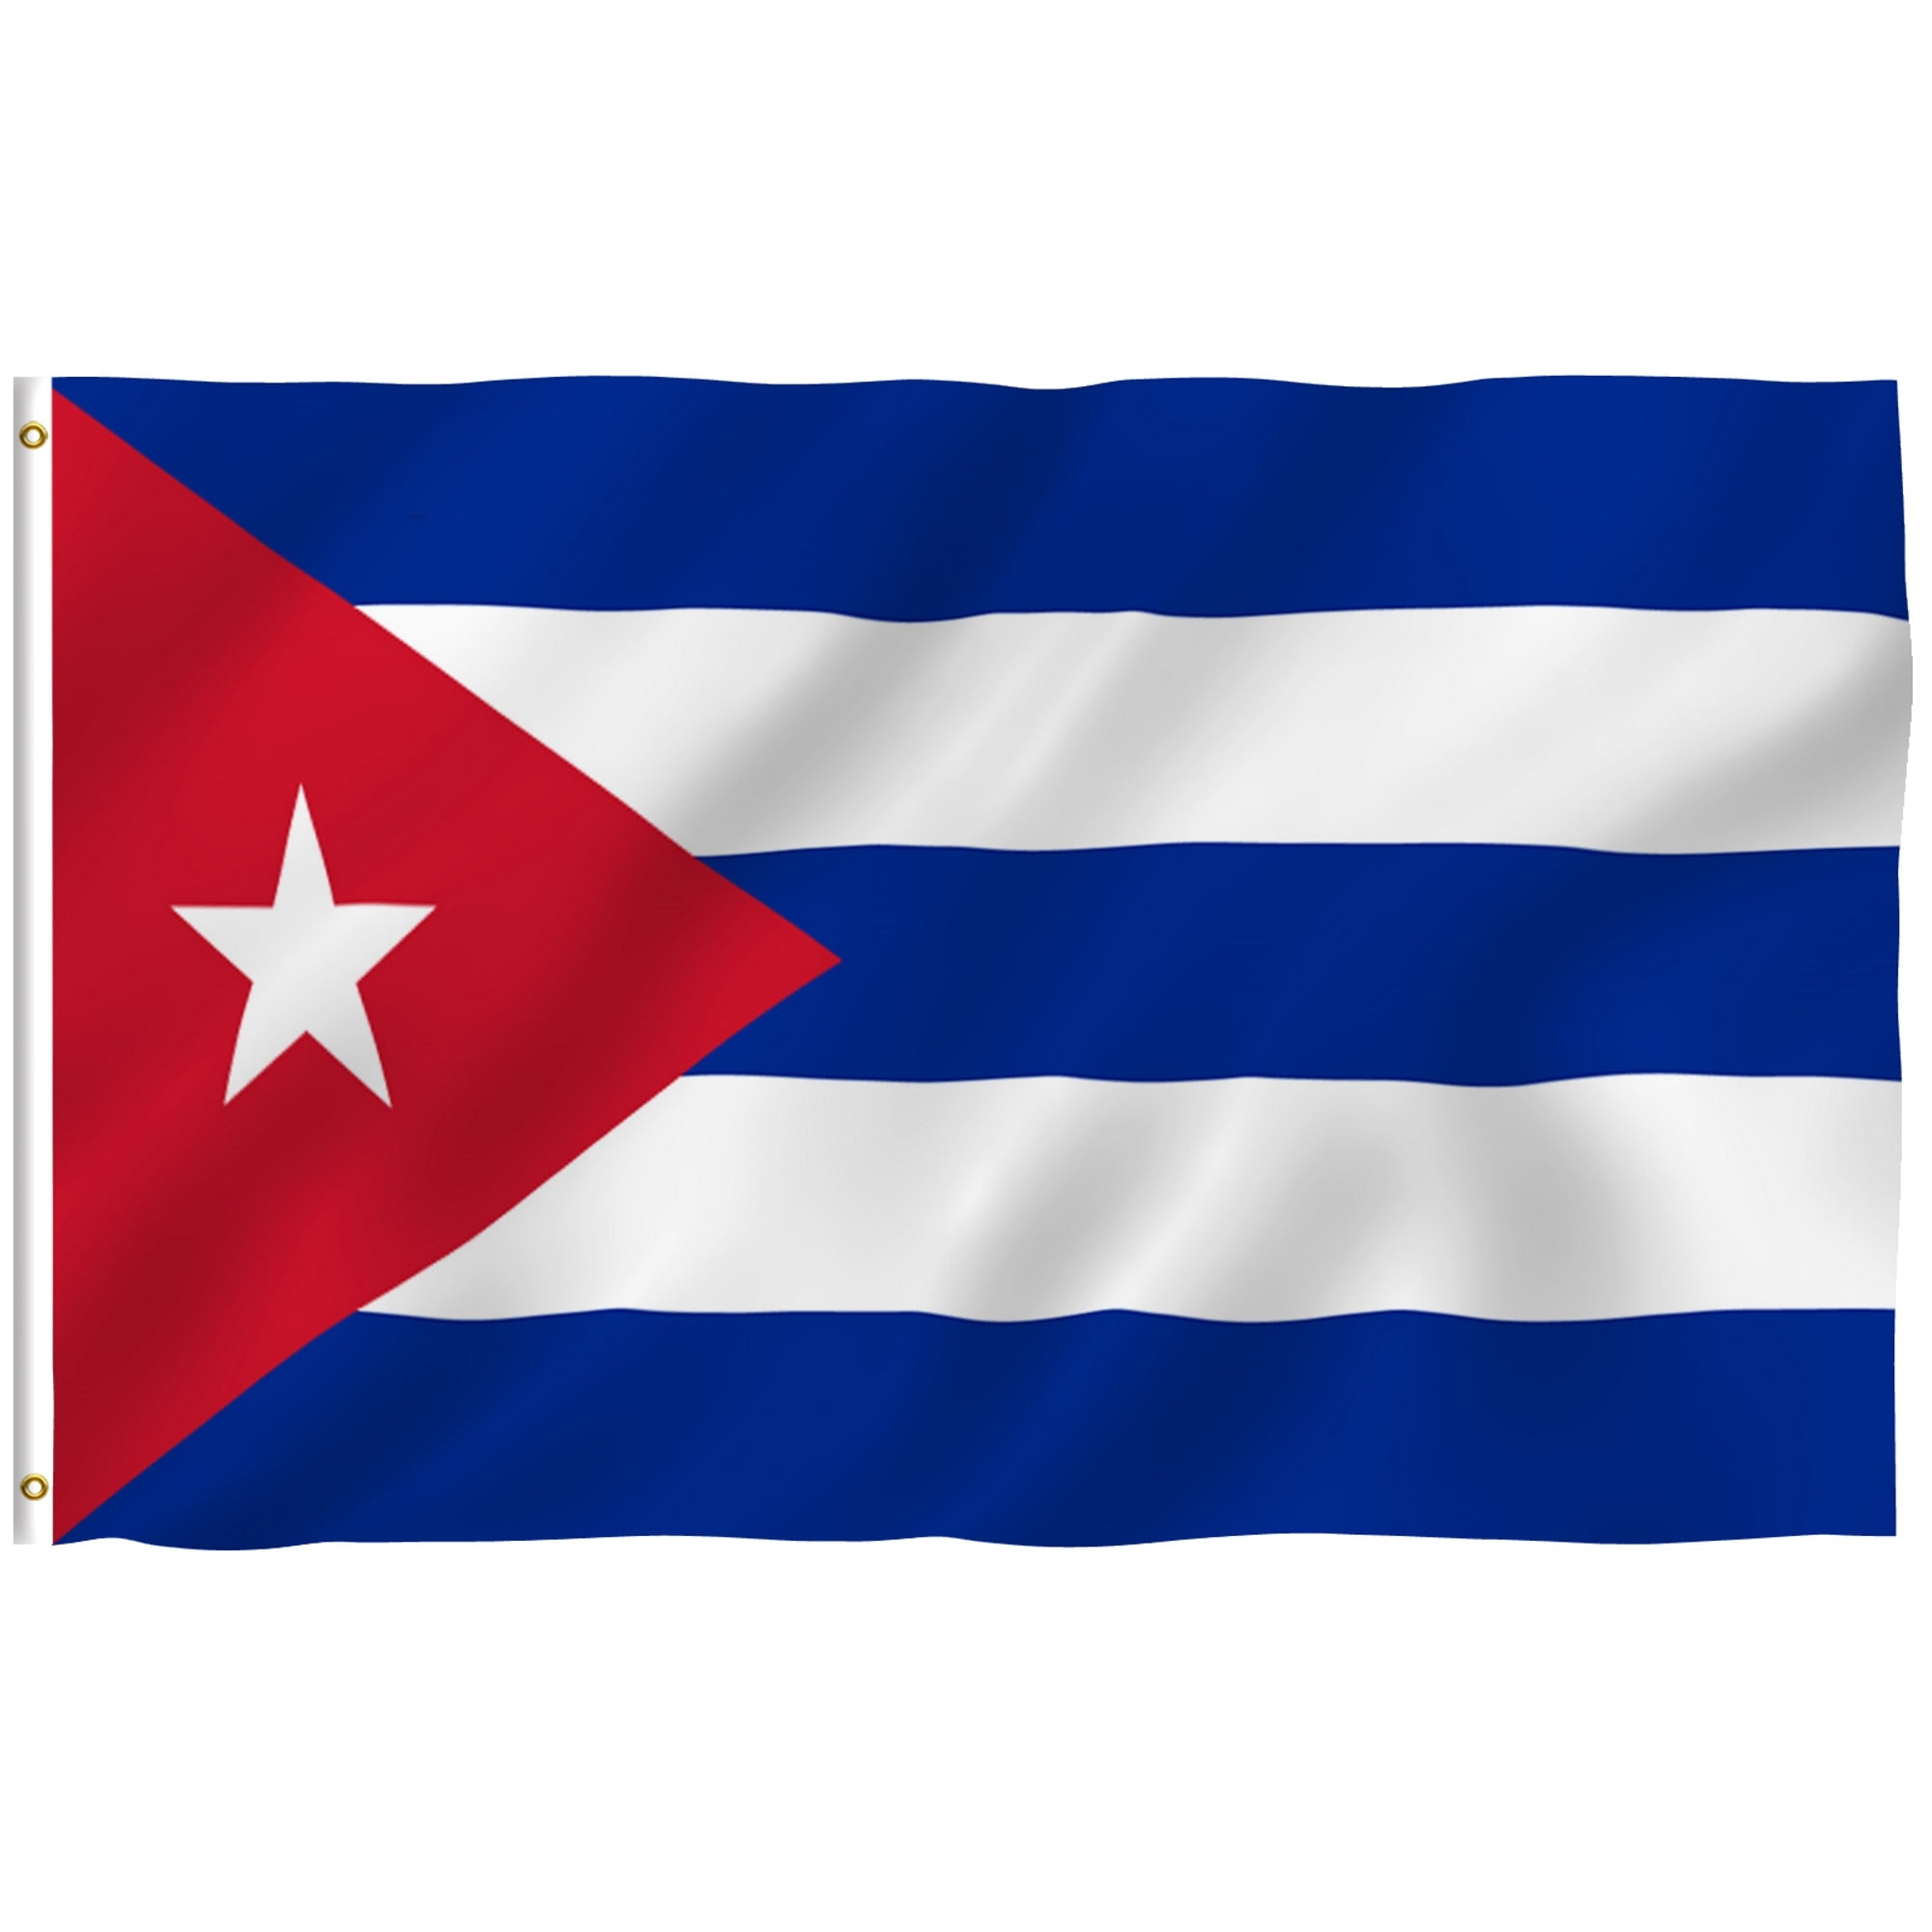 billy munger recommends cuban flag body paint pic